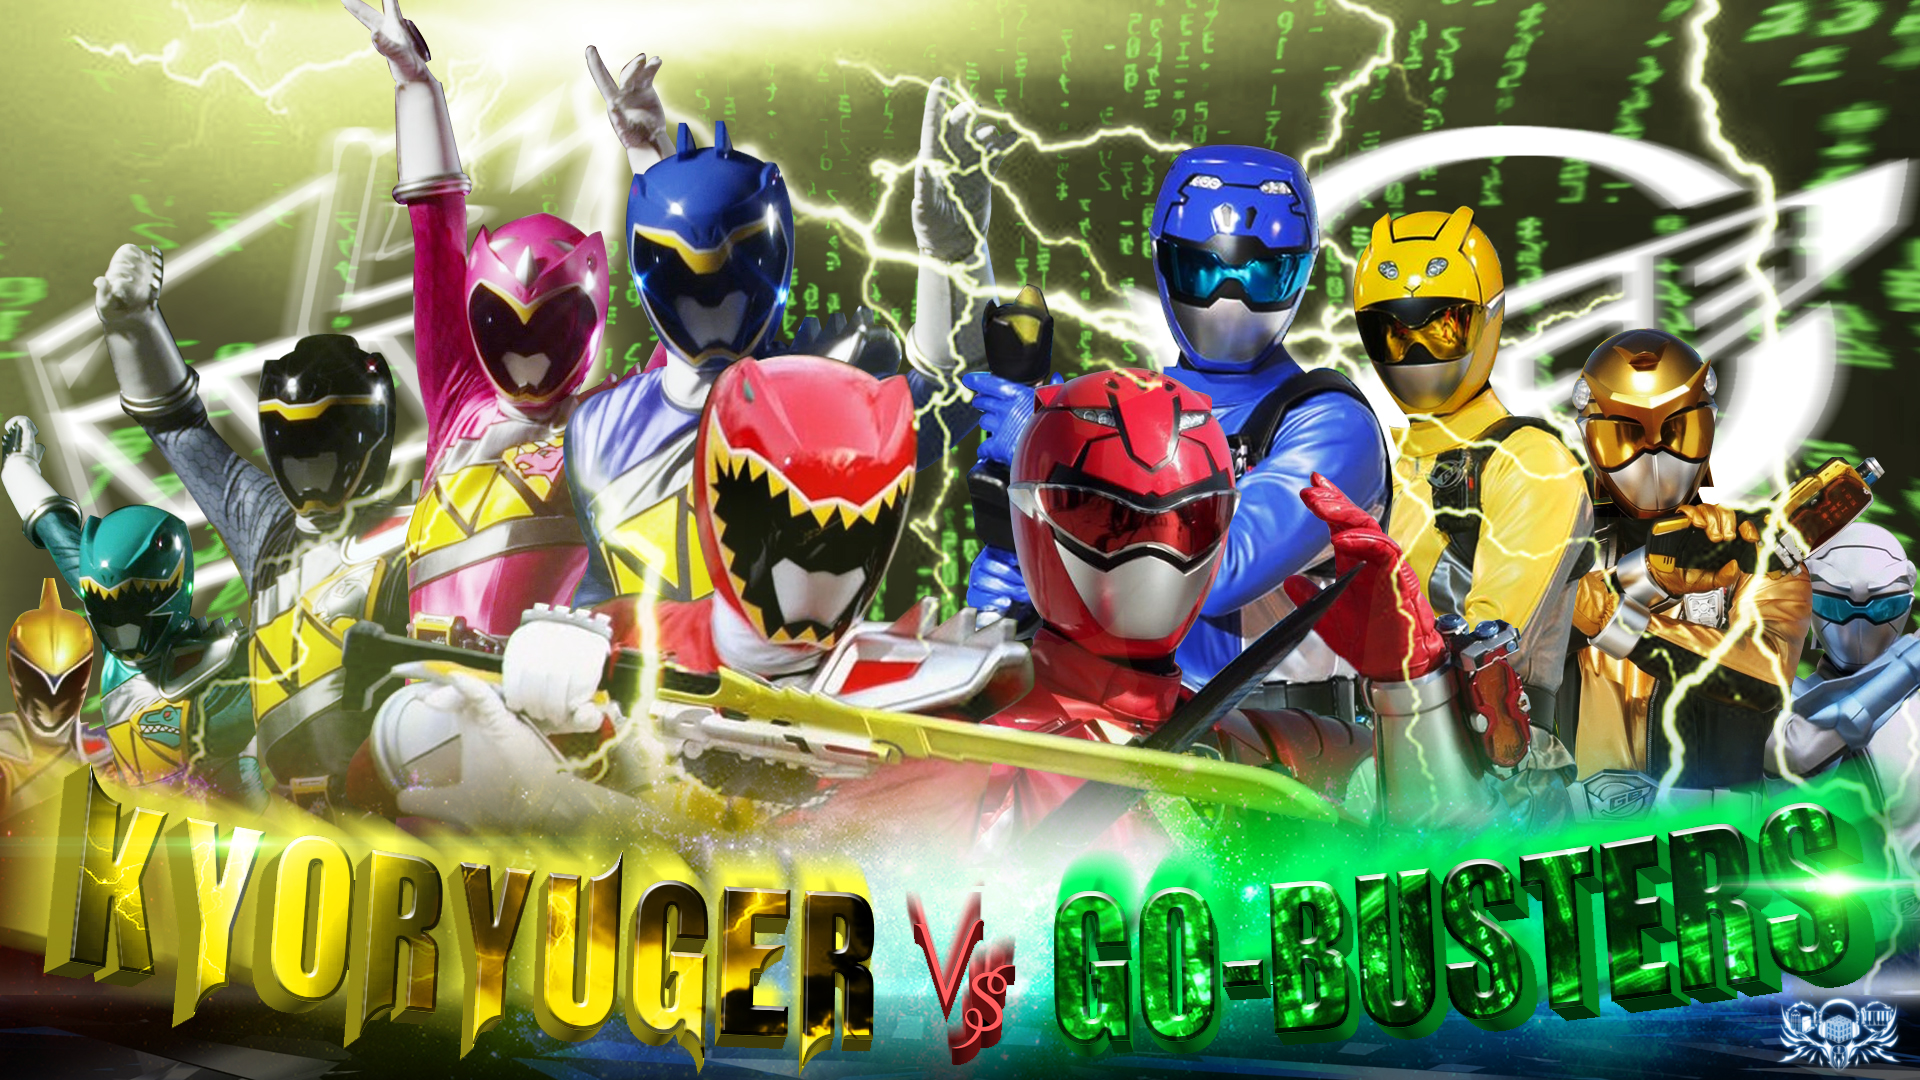 Kyoryuger Vs Go-Busters by hoanngoc09 on deviantART